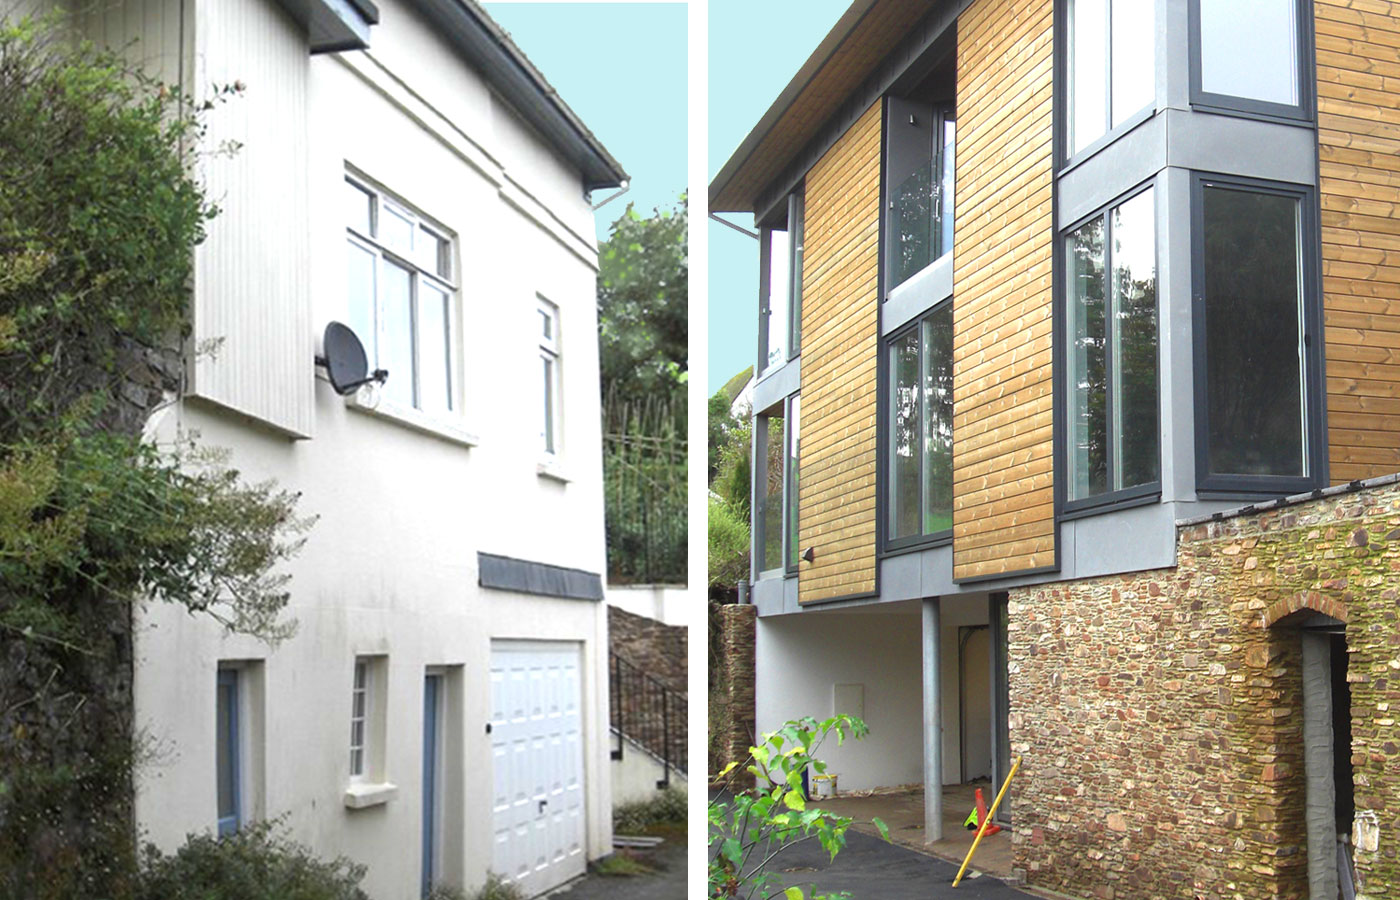 Spriggs Holly Dartmouth new build before and after